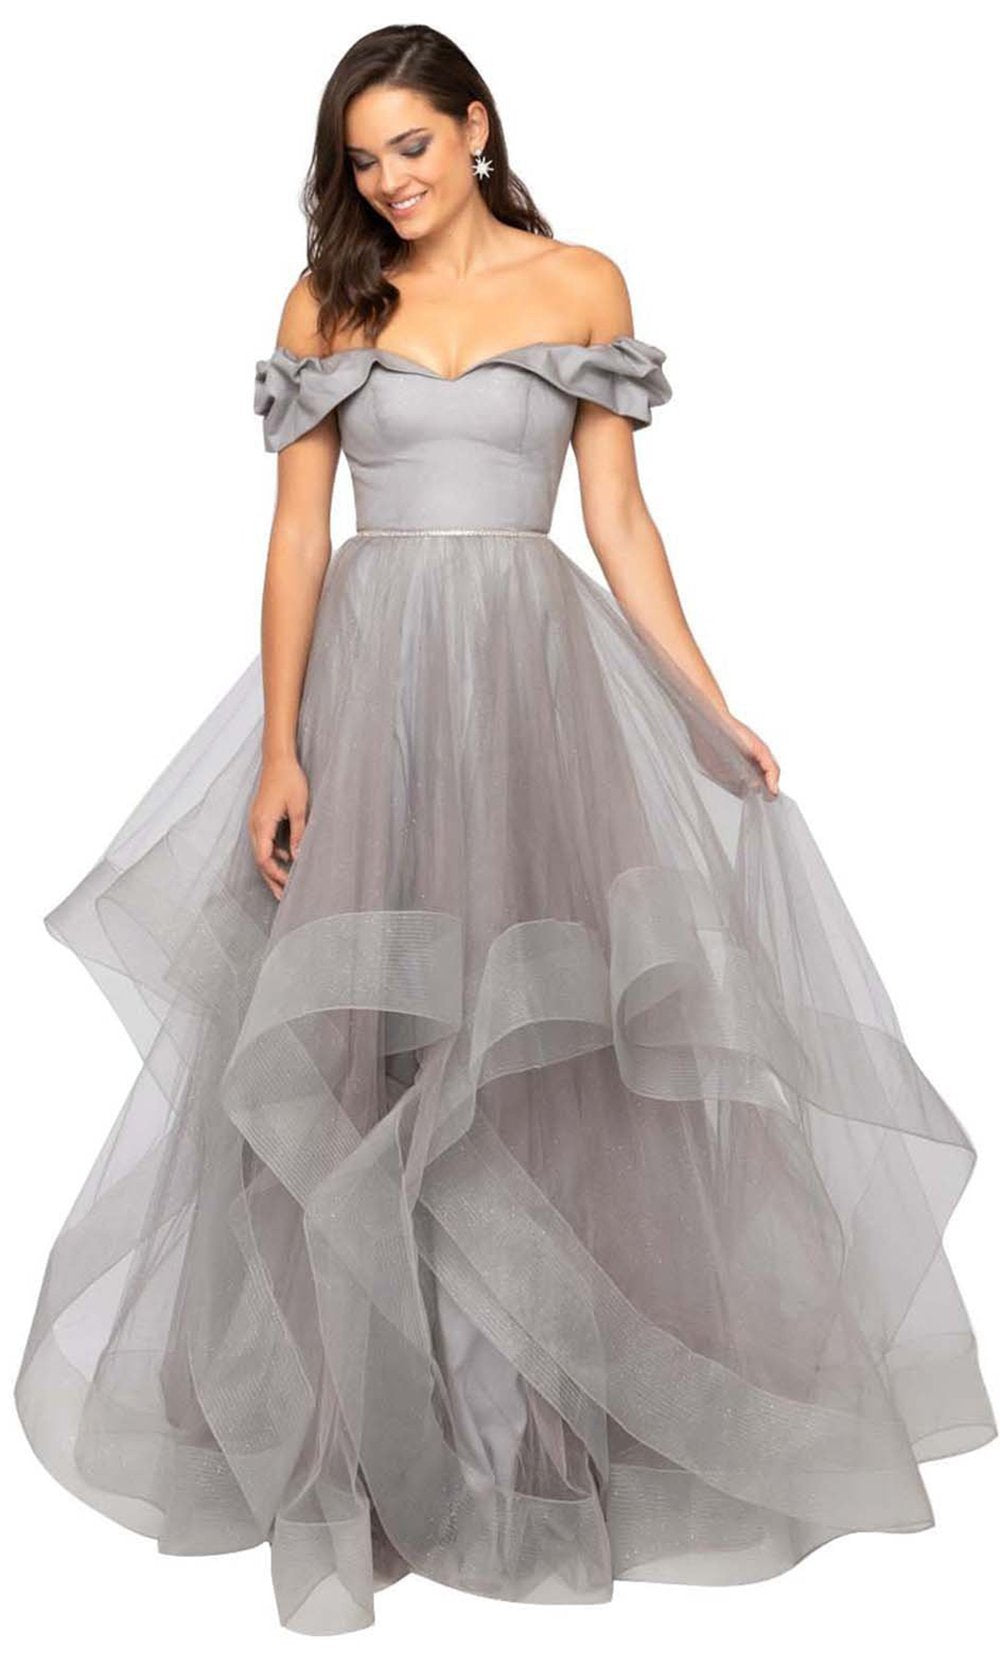 Terani Couture - Ruffled Off-Shoulder Tulle Ballgown 1911P8542 In Grey